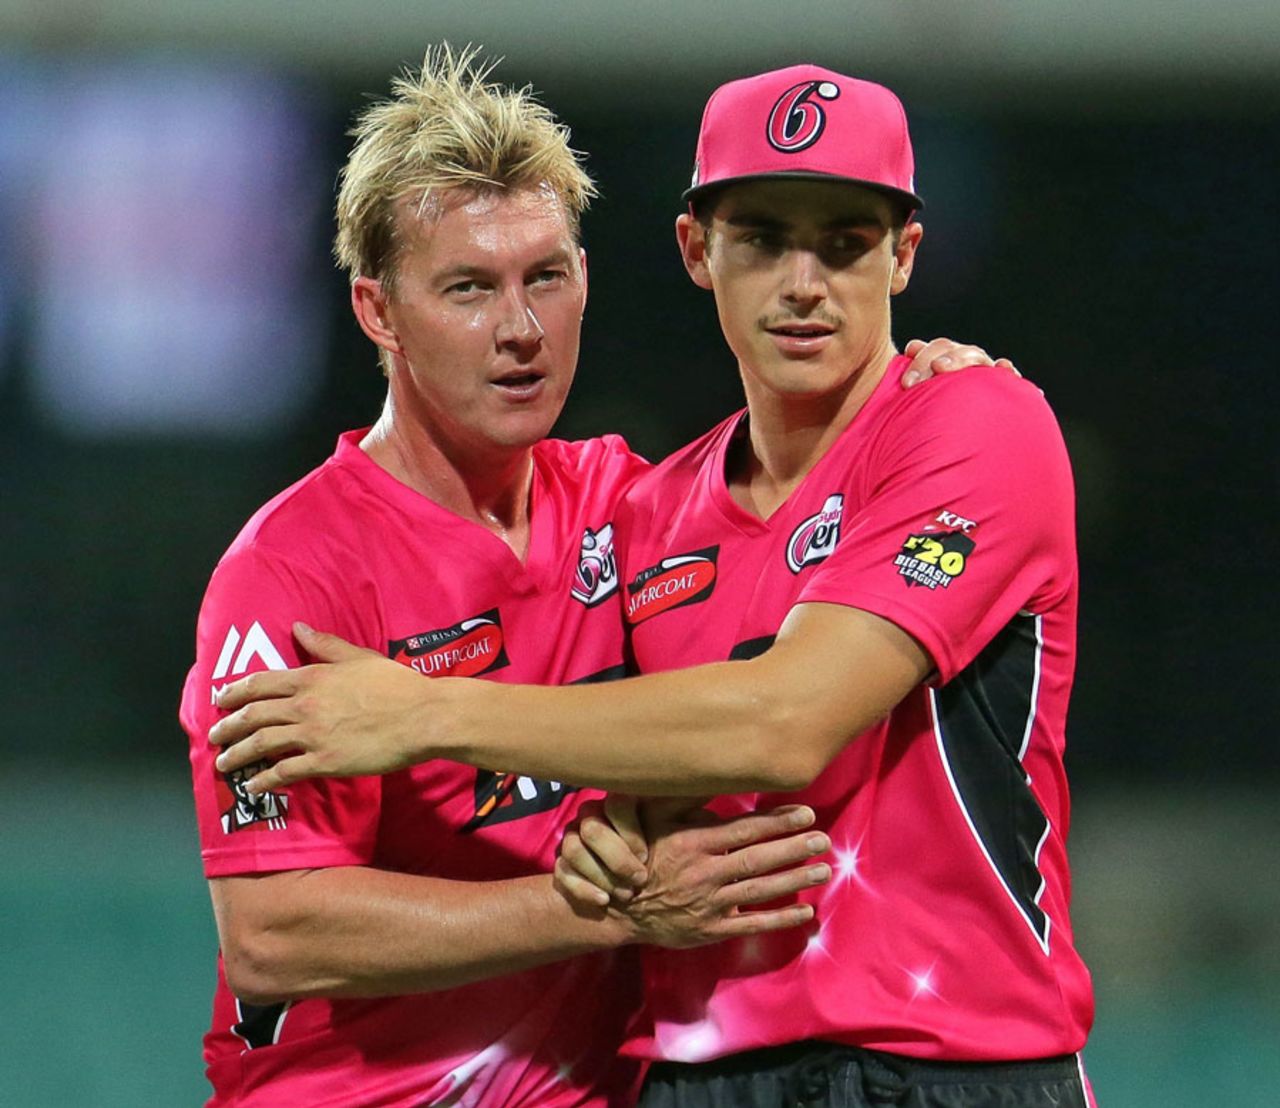 Brett Lee and Sean Abbott picked up two wickets apiece, Sydney Sixers v Melbourne Renegades, Big Bash League 2014-15, Sydney, December 19, 2014 